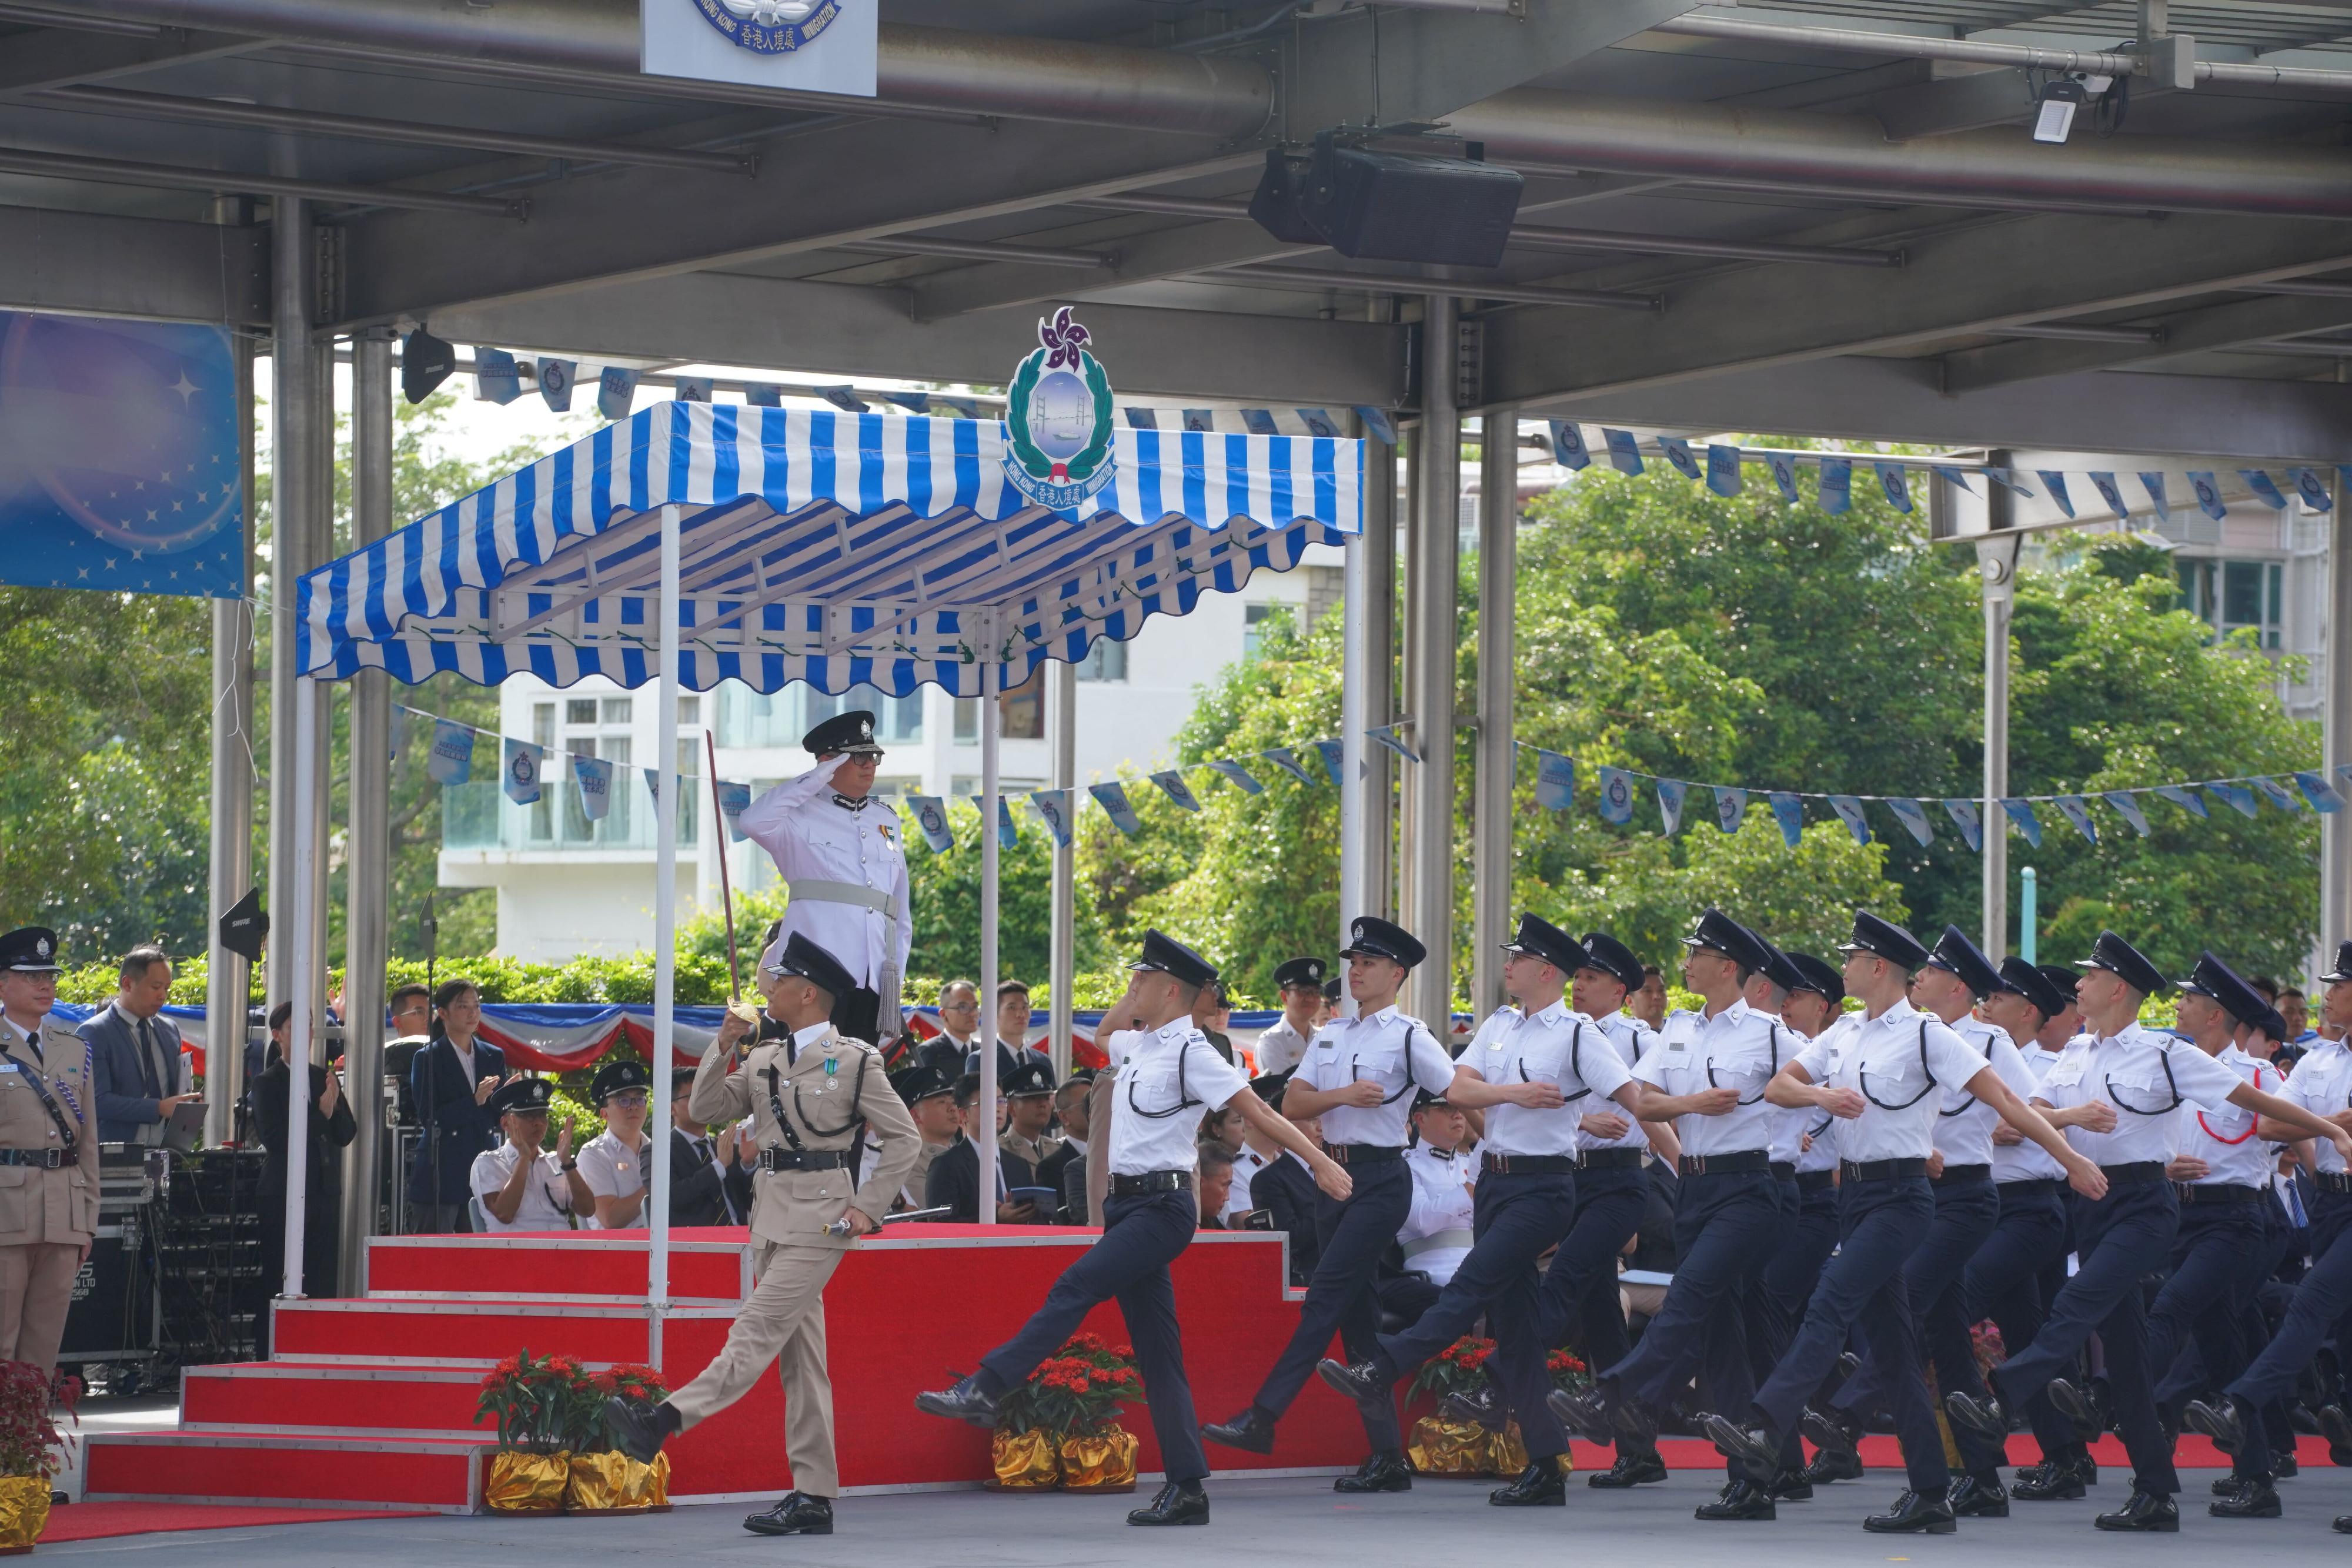 The Immigration Service Institute of Training and Development Passing-out Parade was held today (September 13). Photo shows passing-out officers goose-stepping past the dais in the Chinese-style footdrill performance.